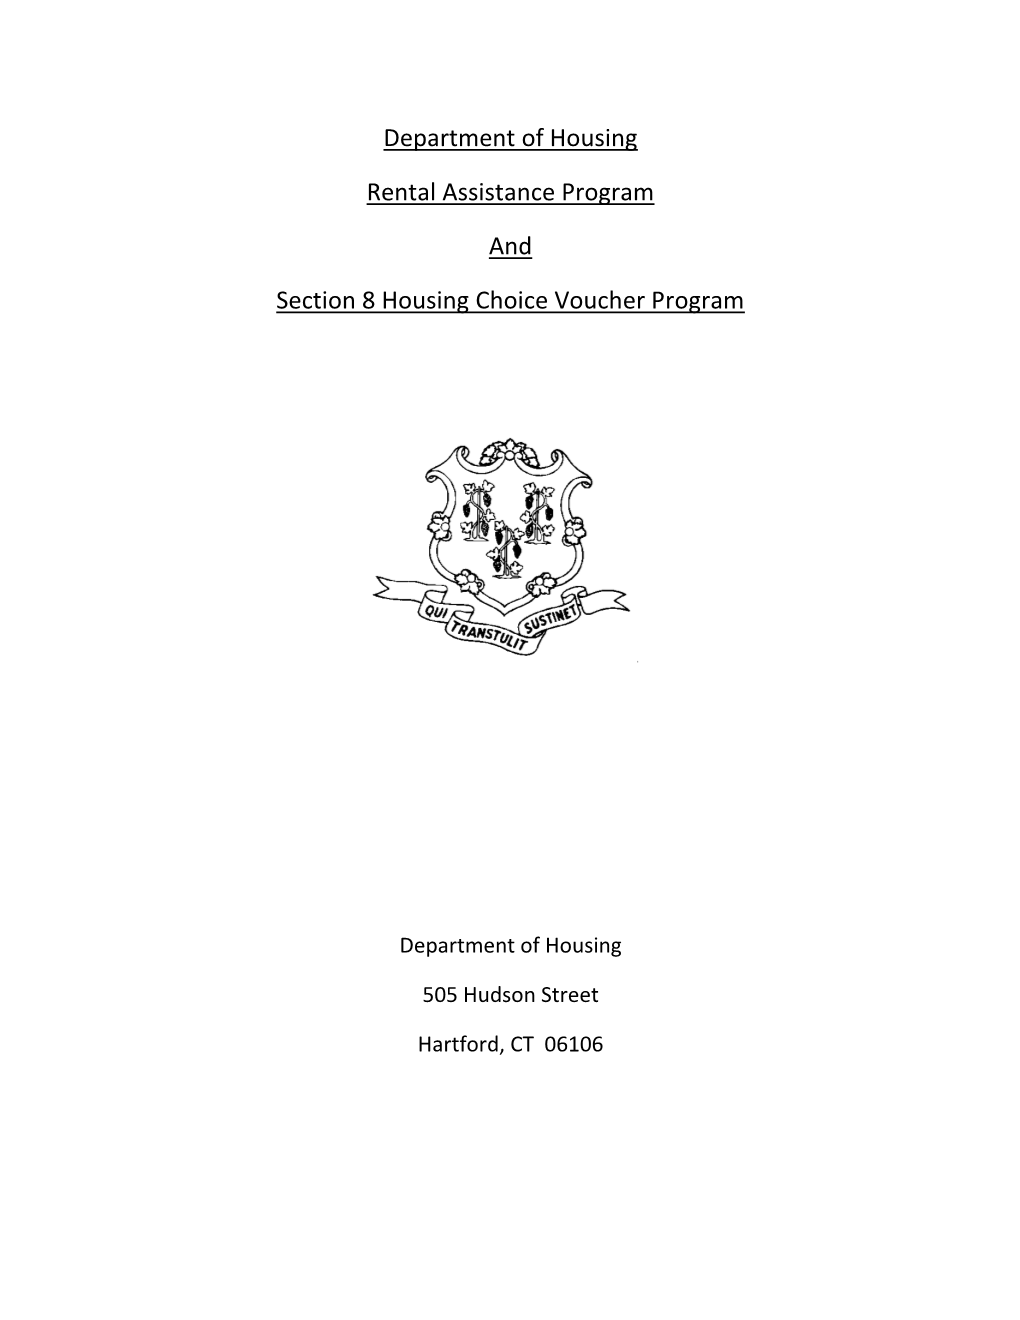 Department of Housing Rental Assistance Program and Section 8